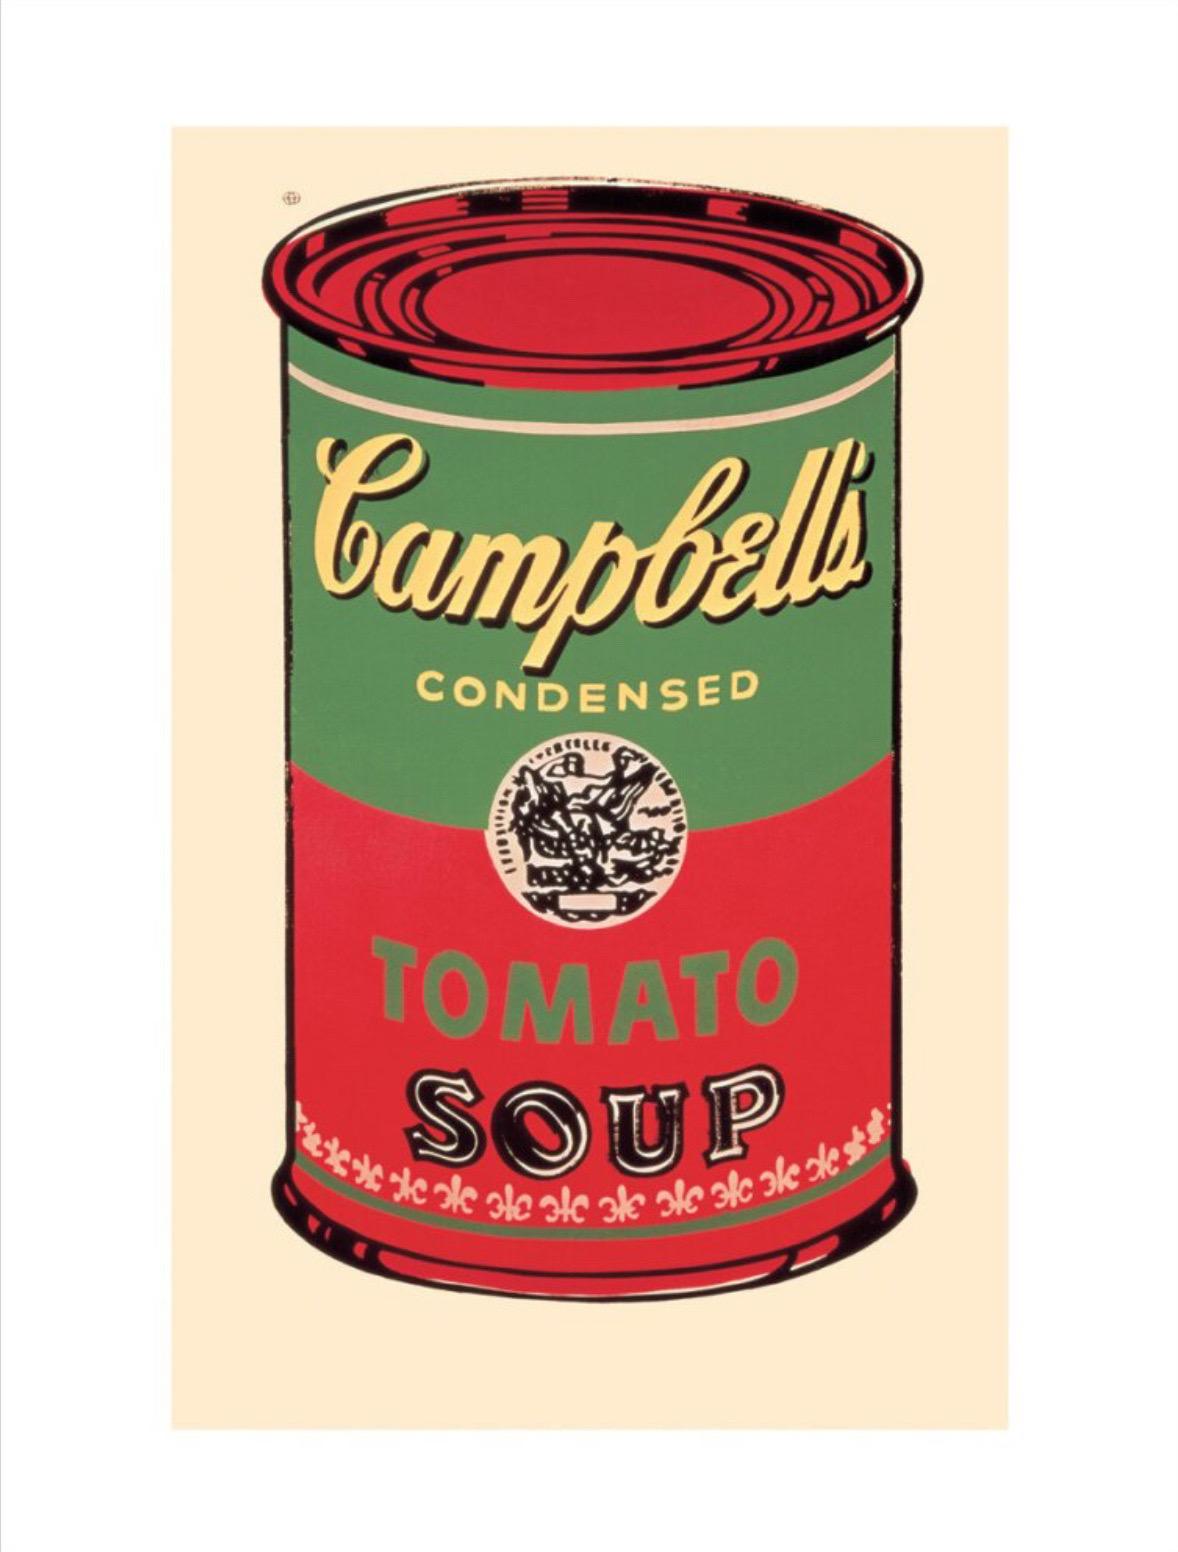 Andy Warhol, Campbell's Soup Can, 1965 (green & red)

250gsm coated graphic paper

Image size 20 x 30 cm (7.87 x 11.81 in) 

Paper size 28 x 36 cm (11.02 x 14.17 in) 


Andy Warhol’s Campbell’s Soup Cans are among the most recognizable and